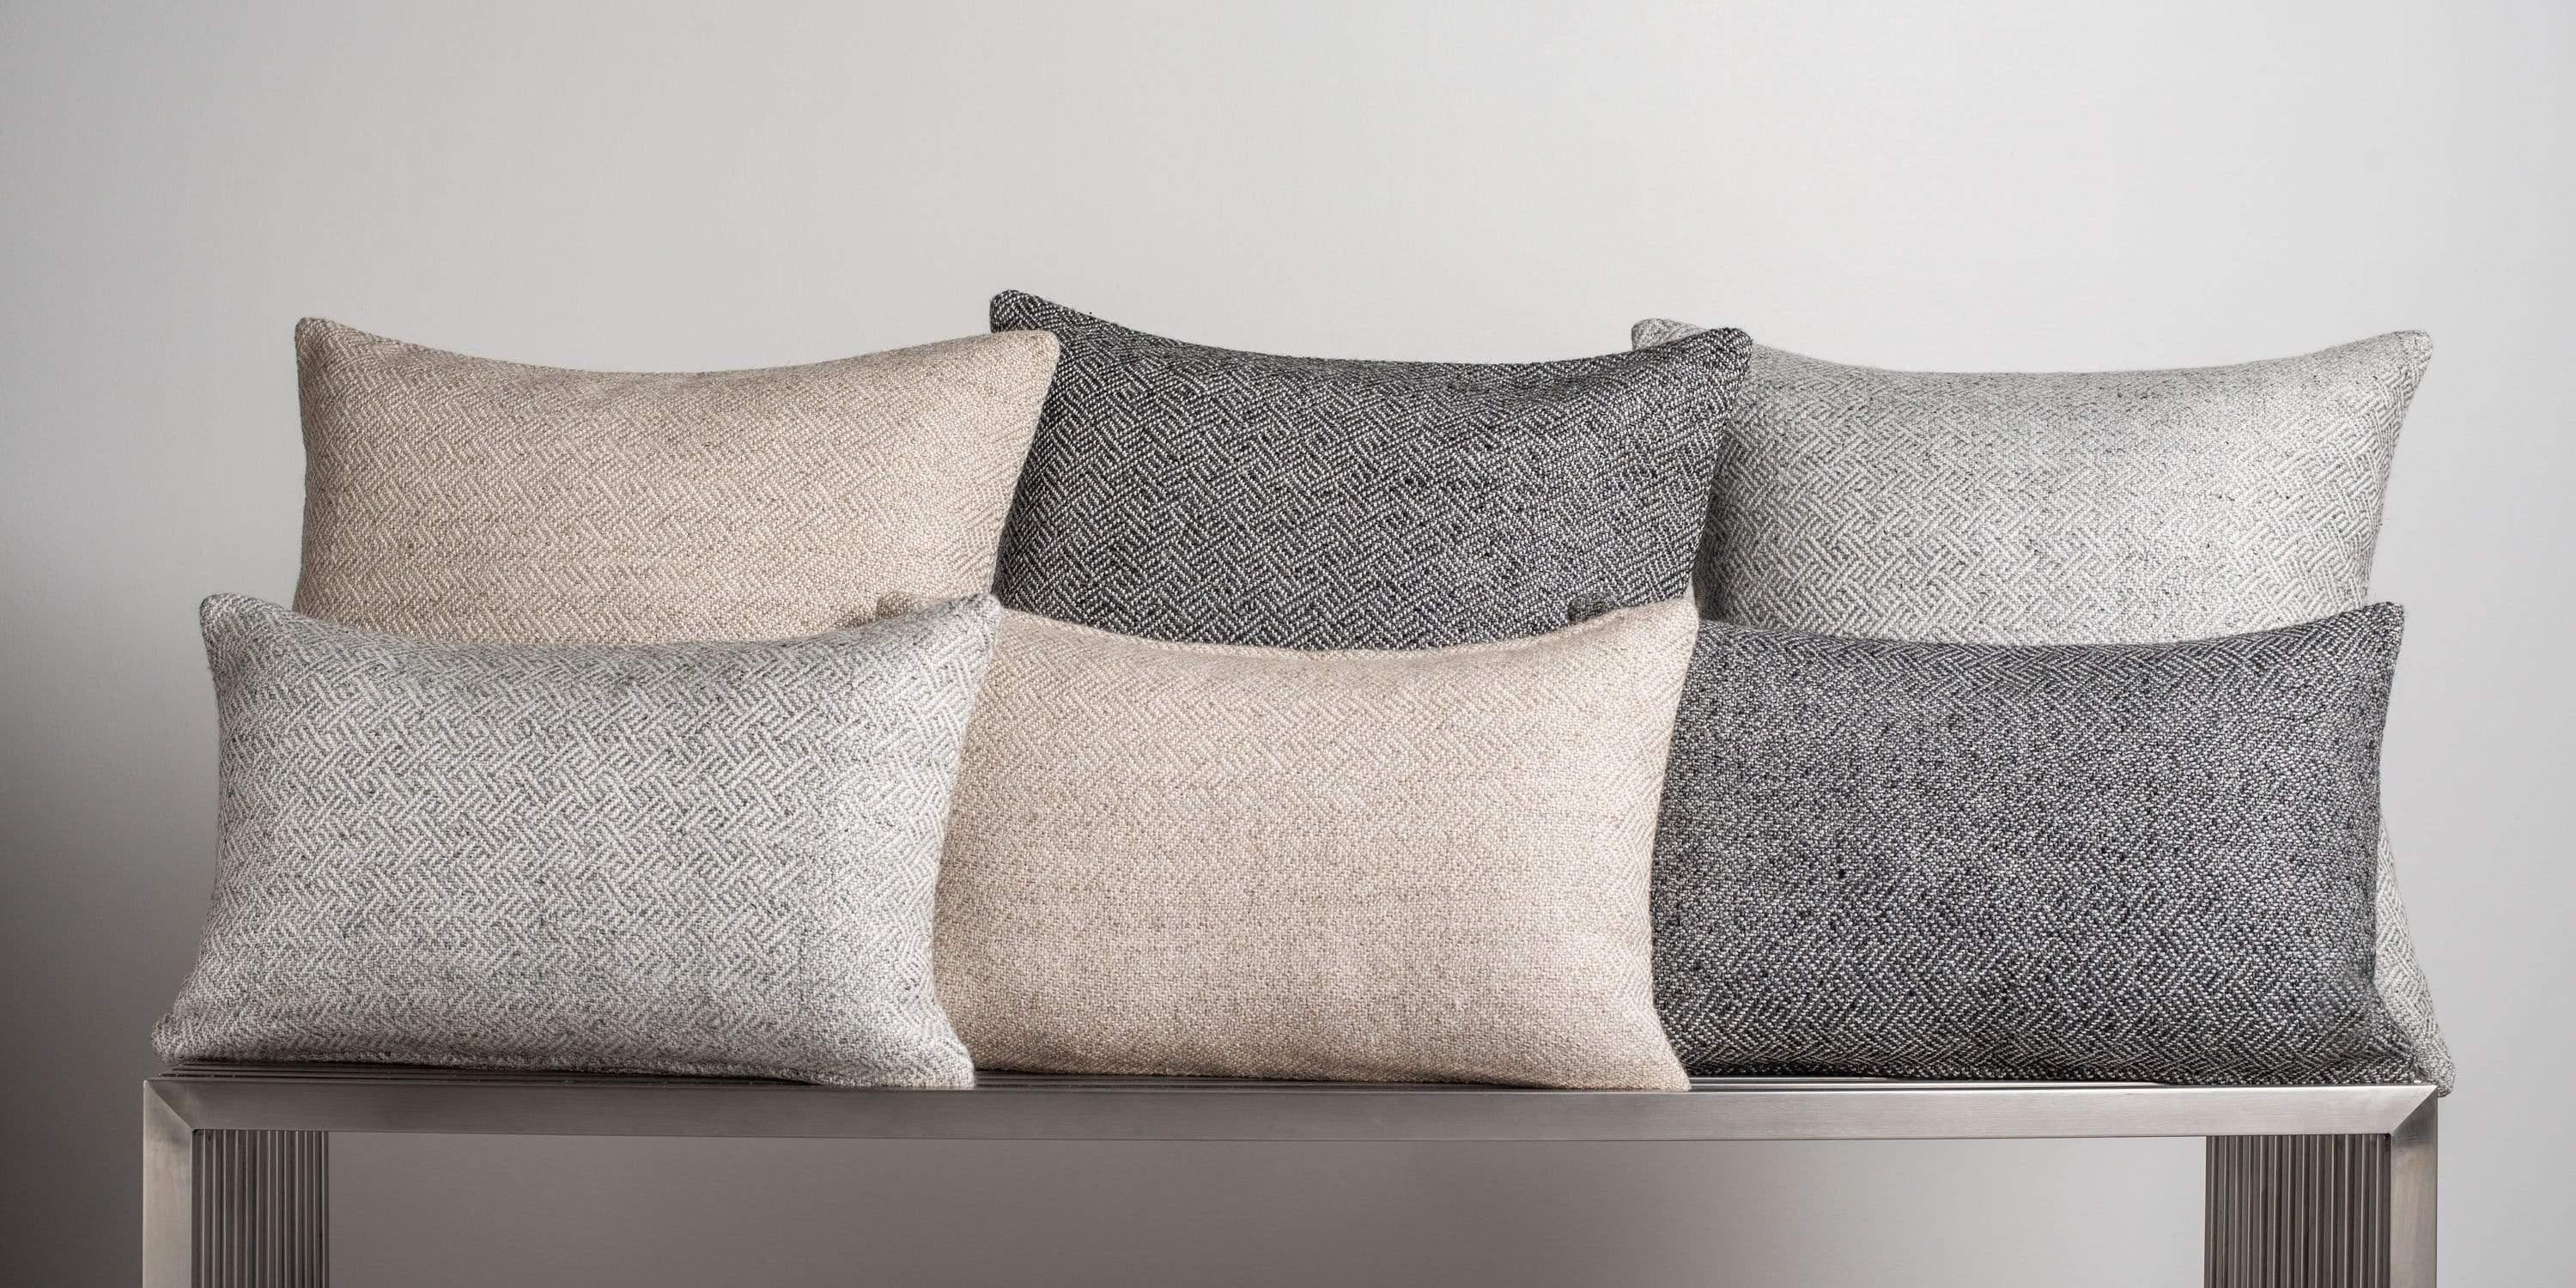 The perfect accent pillow, woven with a subtly modern angled diamond graphic is full of texture and depth creating contrast when paired with our sumptuous cashmere pillows. Pillow insert sold separately.

Size 26